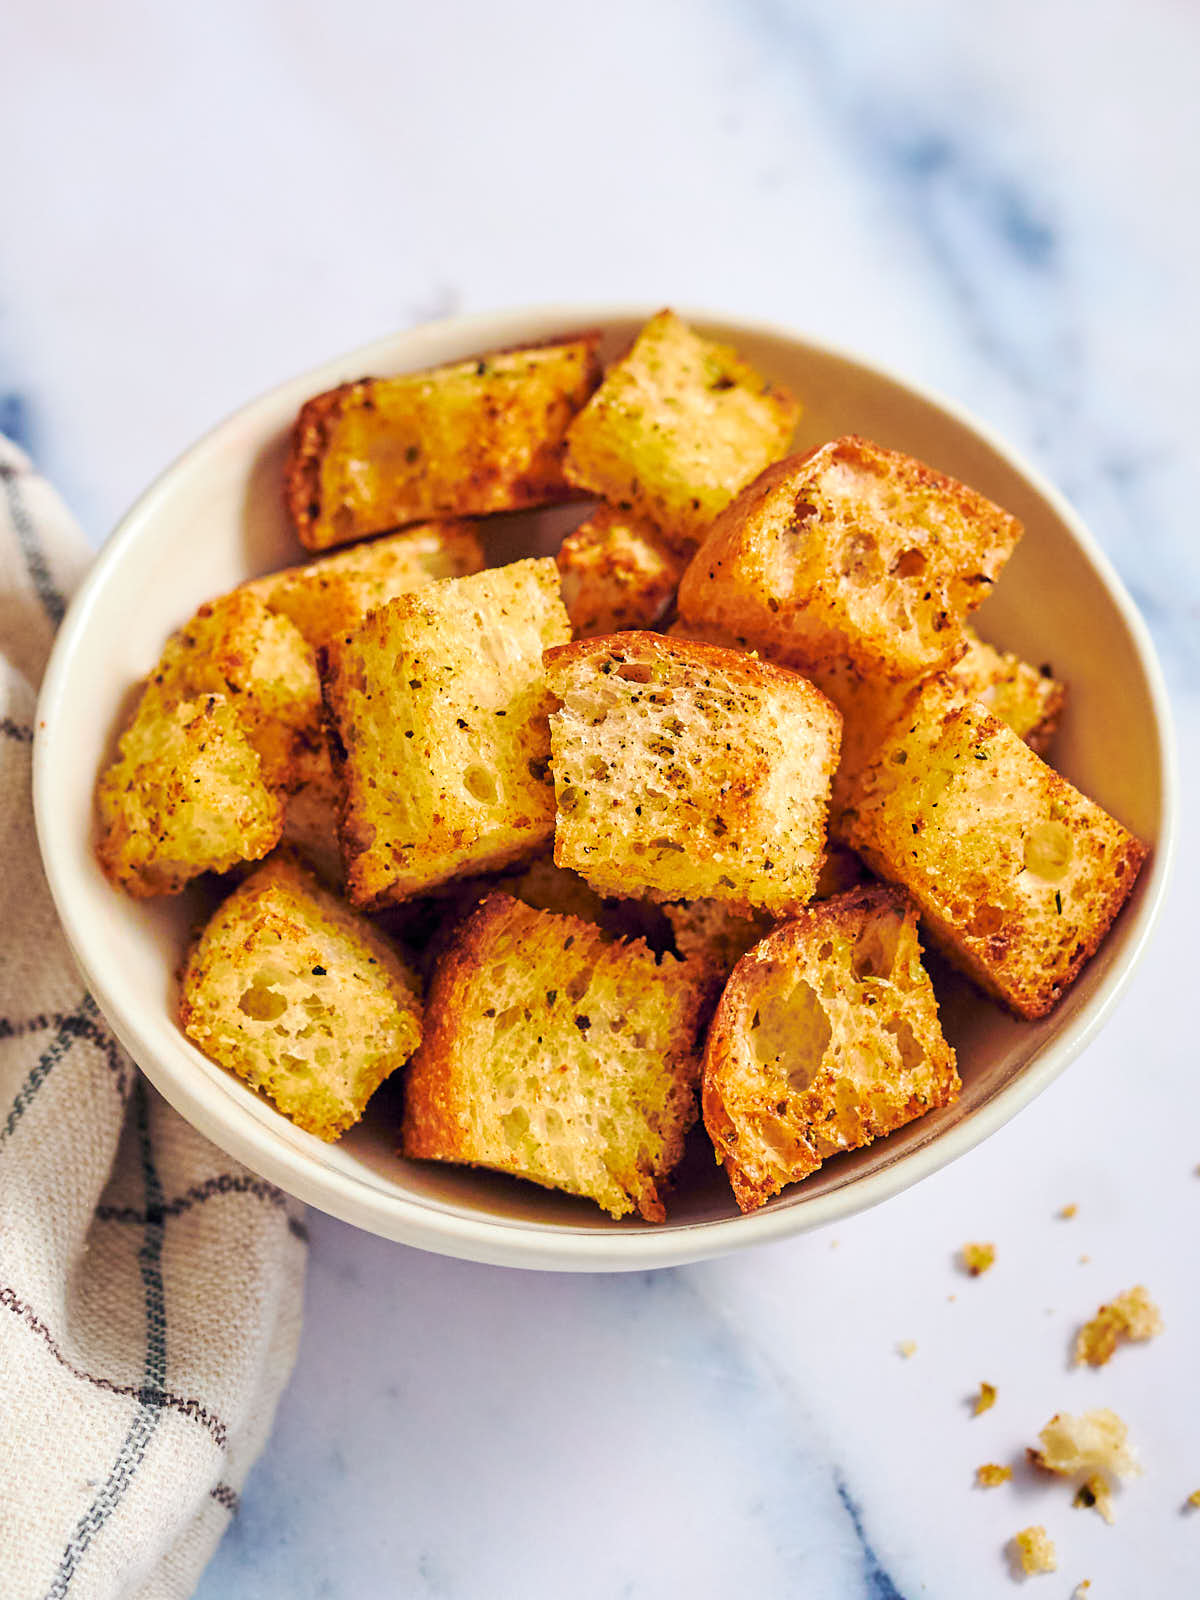 Crispy air fryer croutons in a bowl on a marble counter.